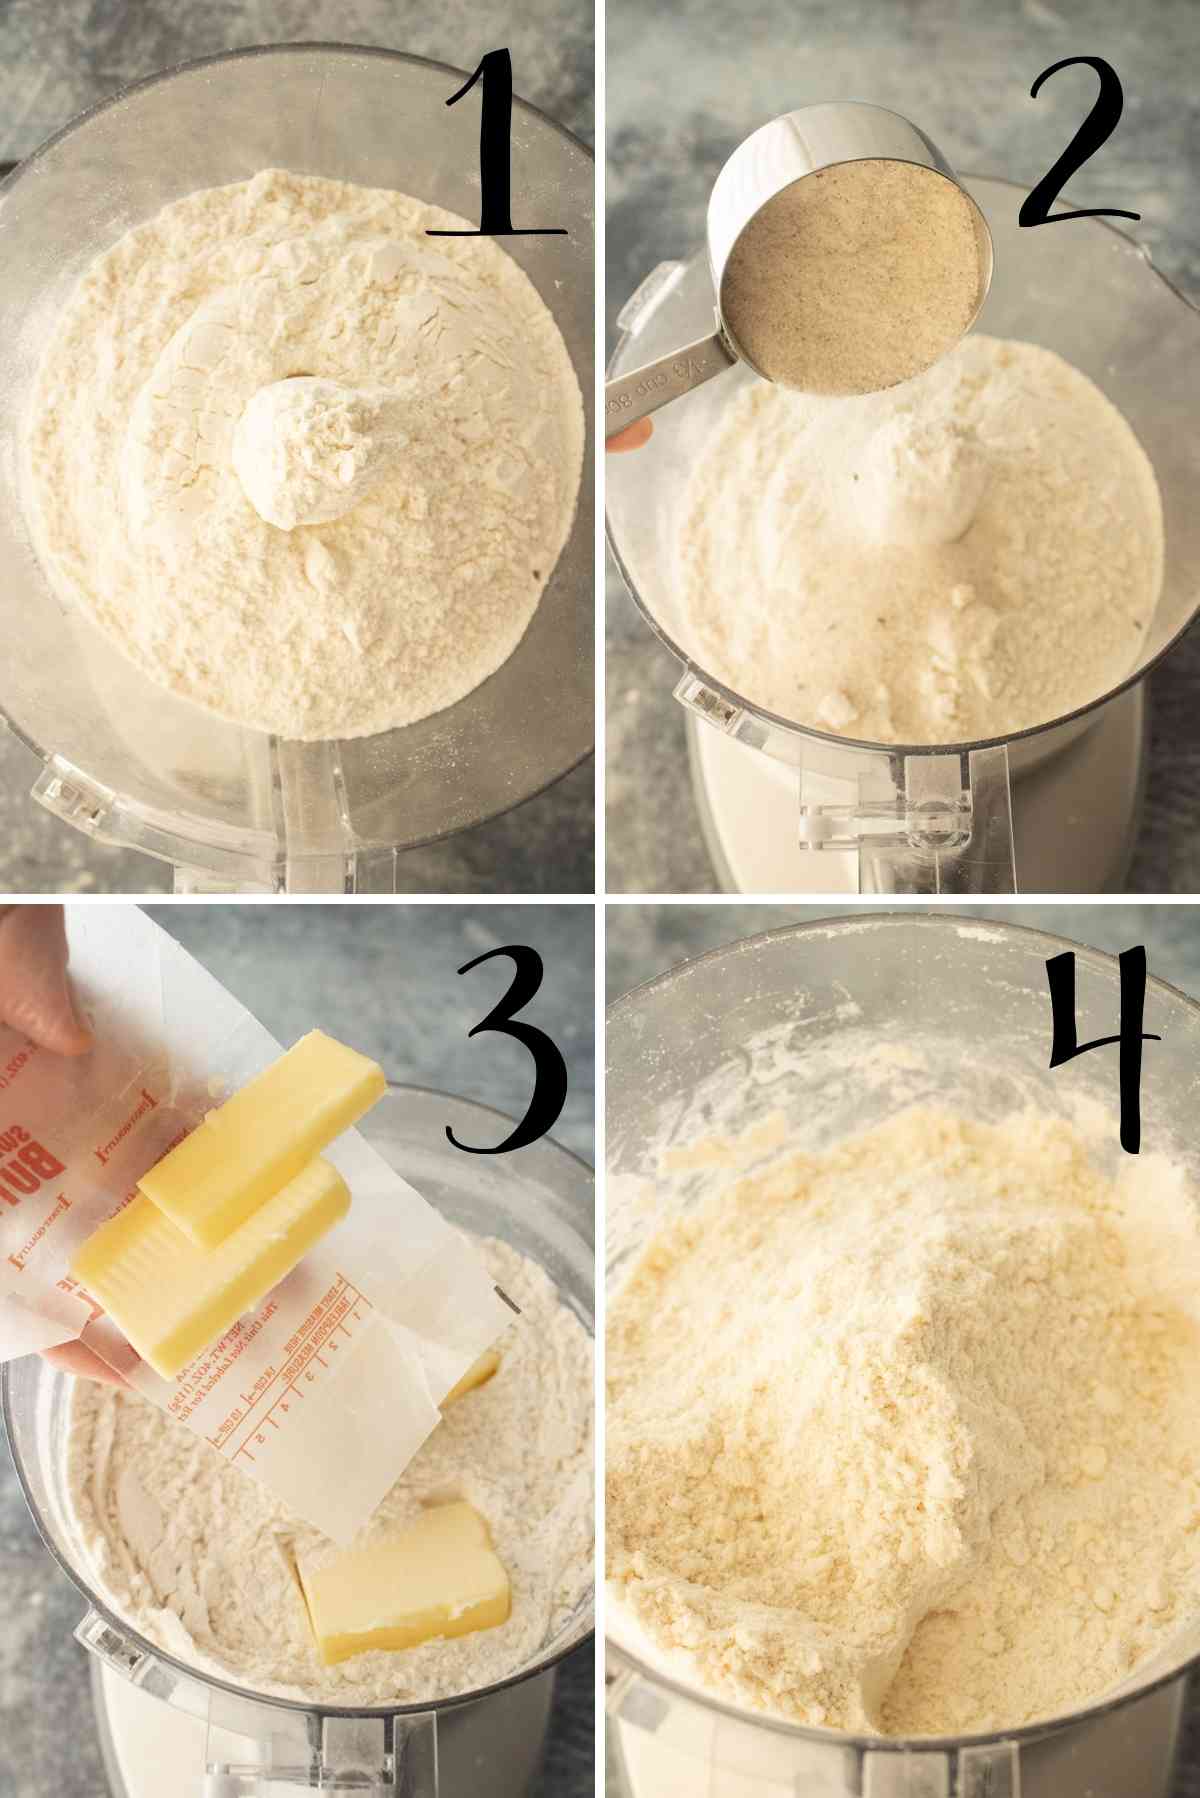 Flour, baking powder, sugar and butter processed until crumbly.